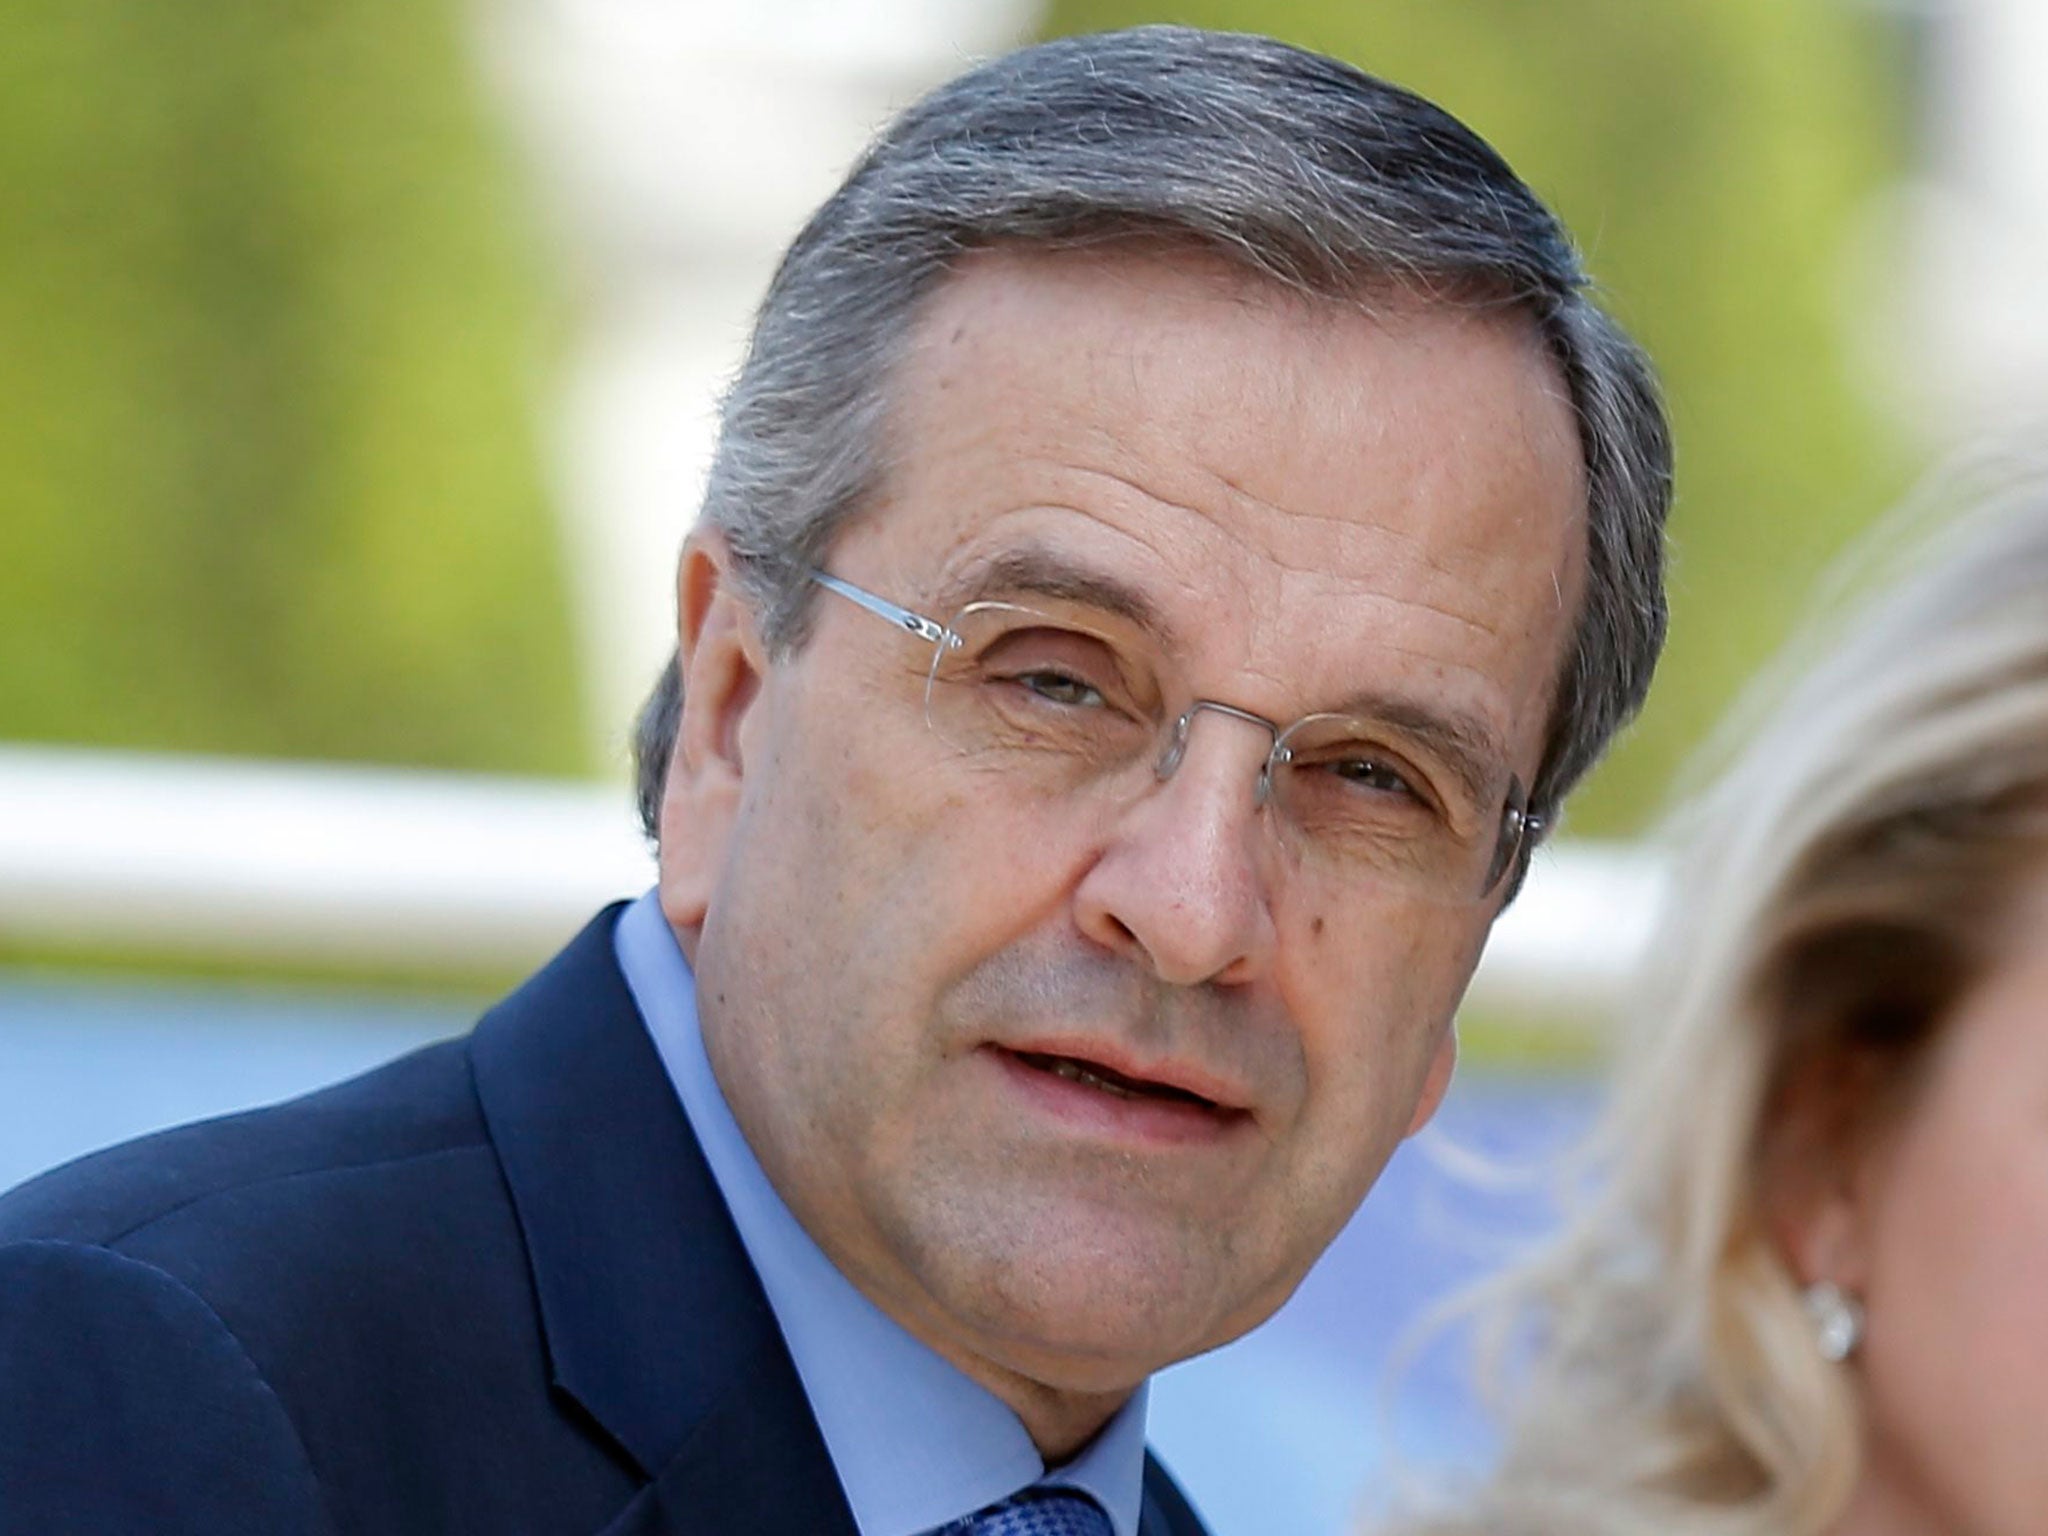 Antonis Samaras headed Greece’s last austerity government before losing the vote in January 2015